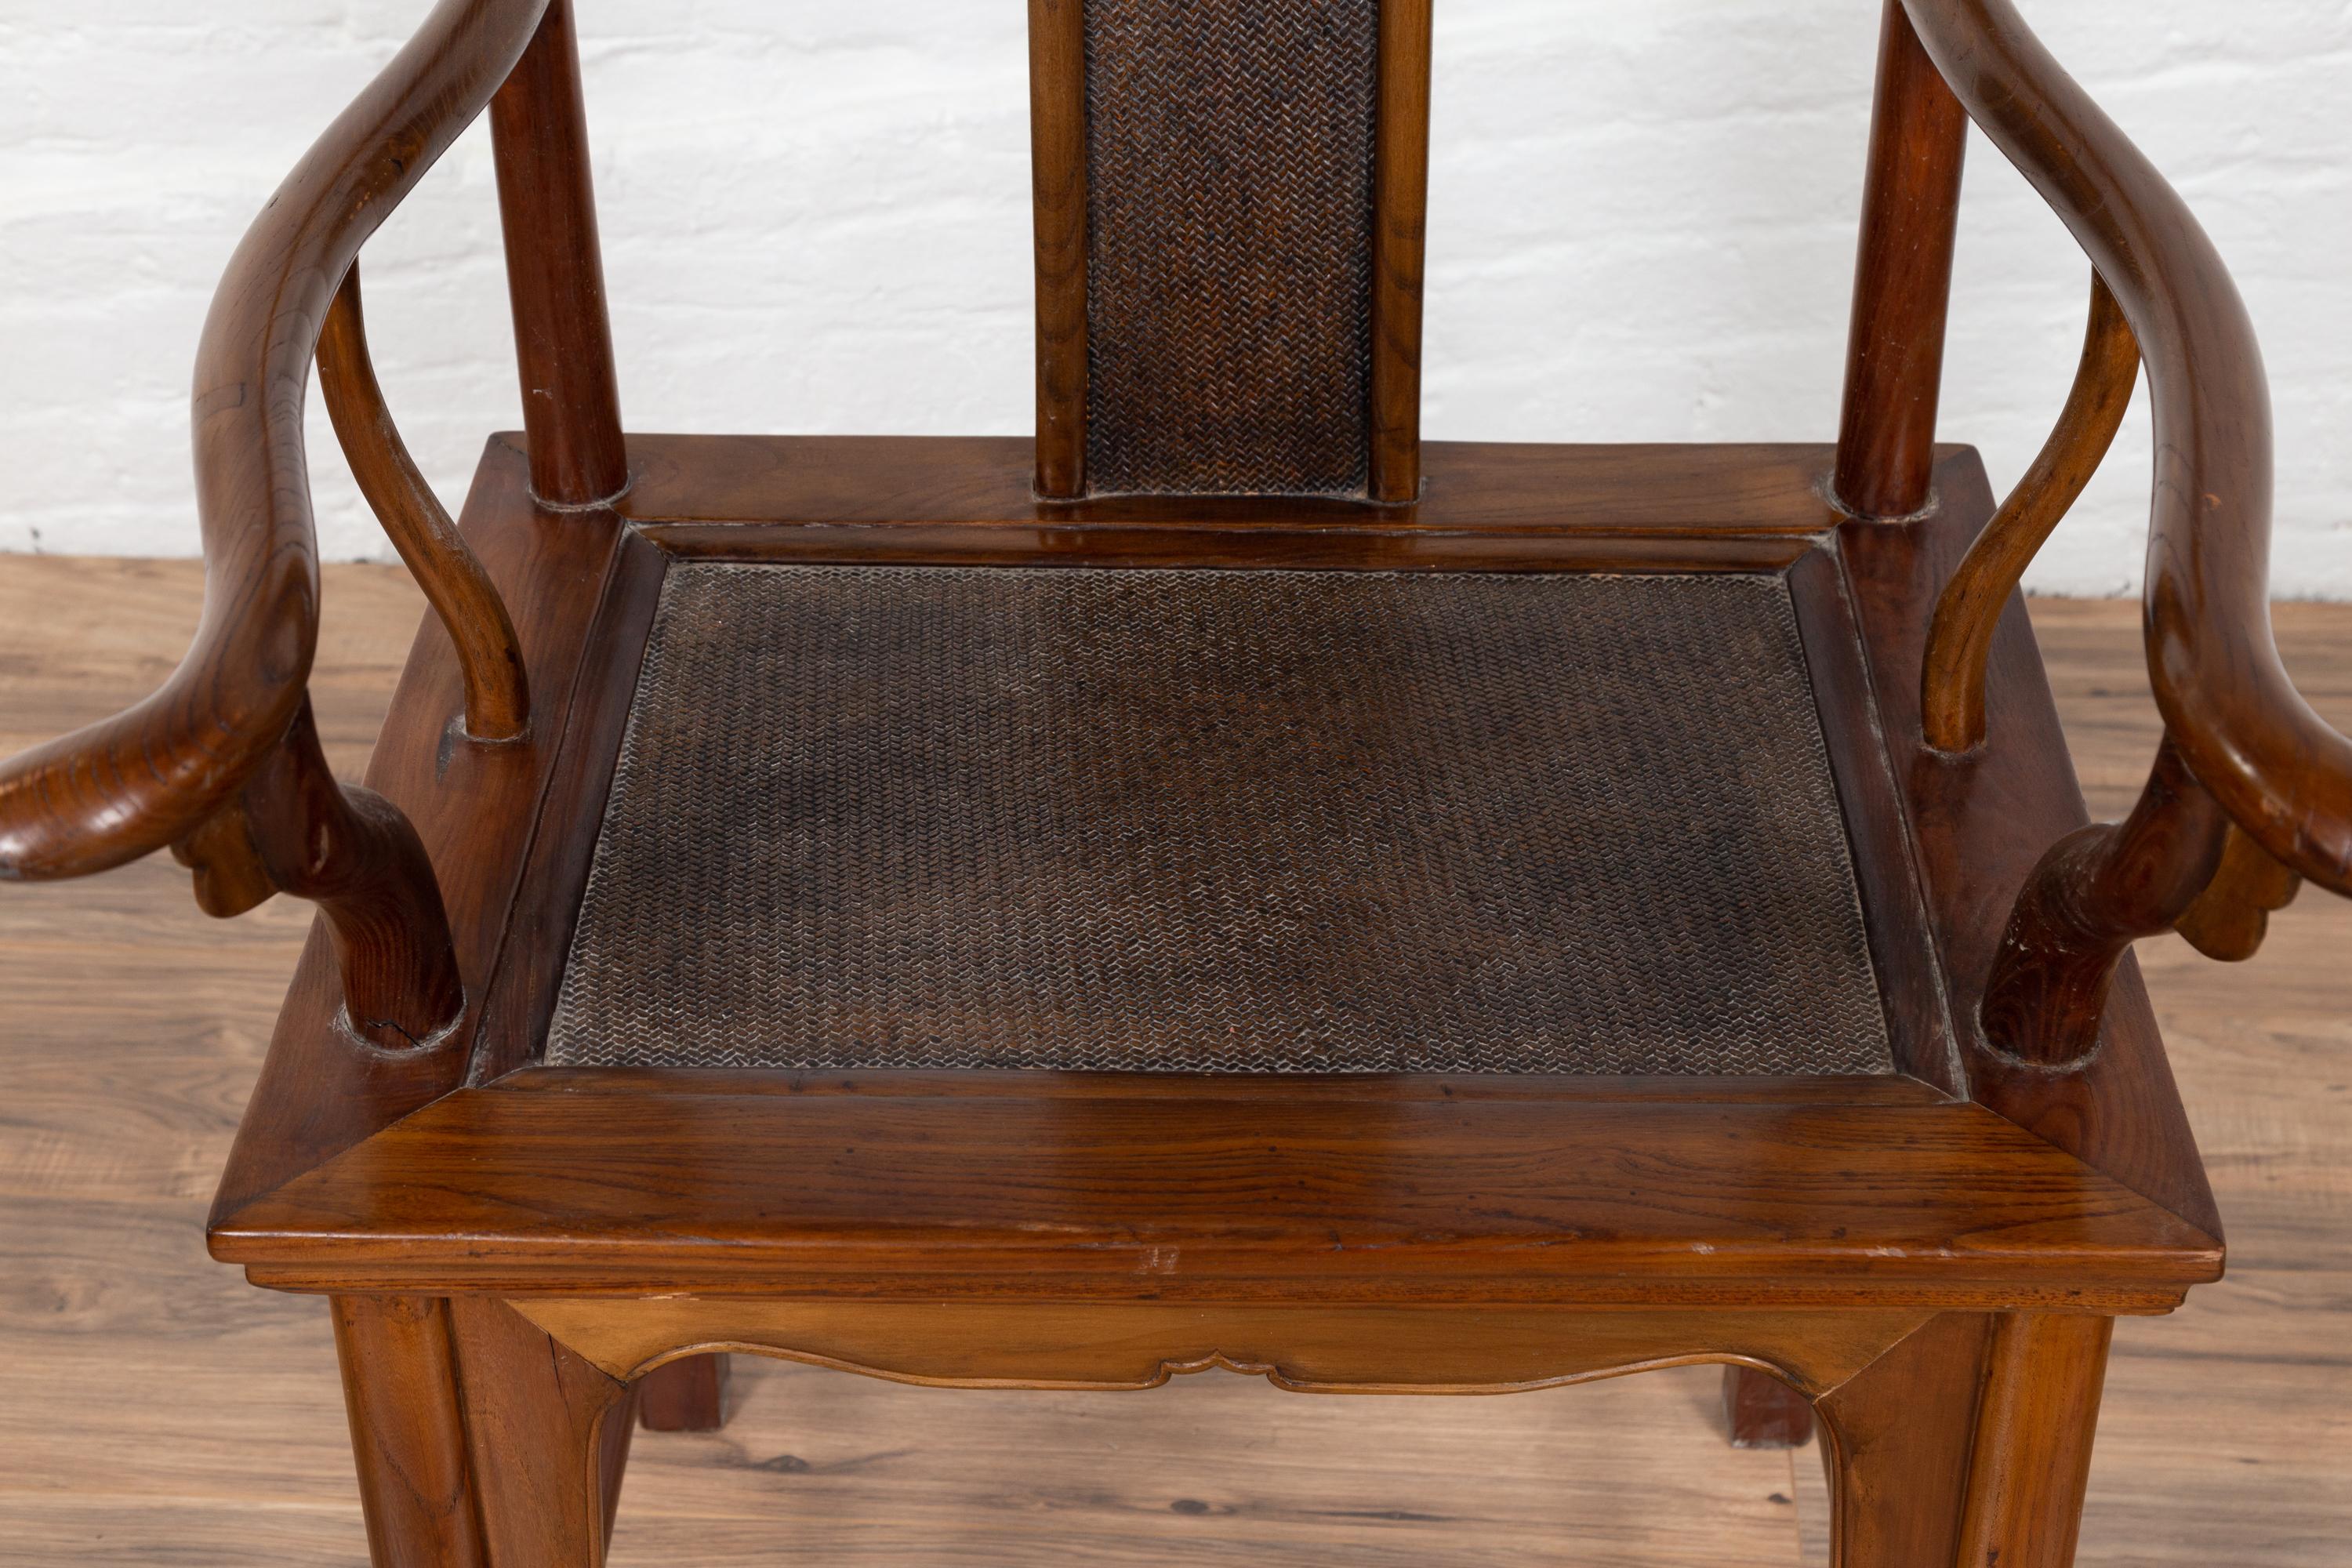 Chinese Antique Ming Dynasty Style Scholar's Lamp-Hanger Chair with Rattan Inset For Sale 1